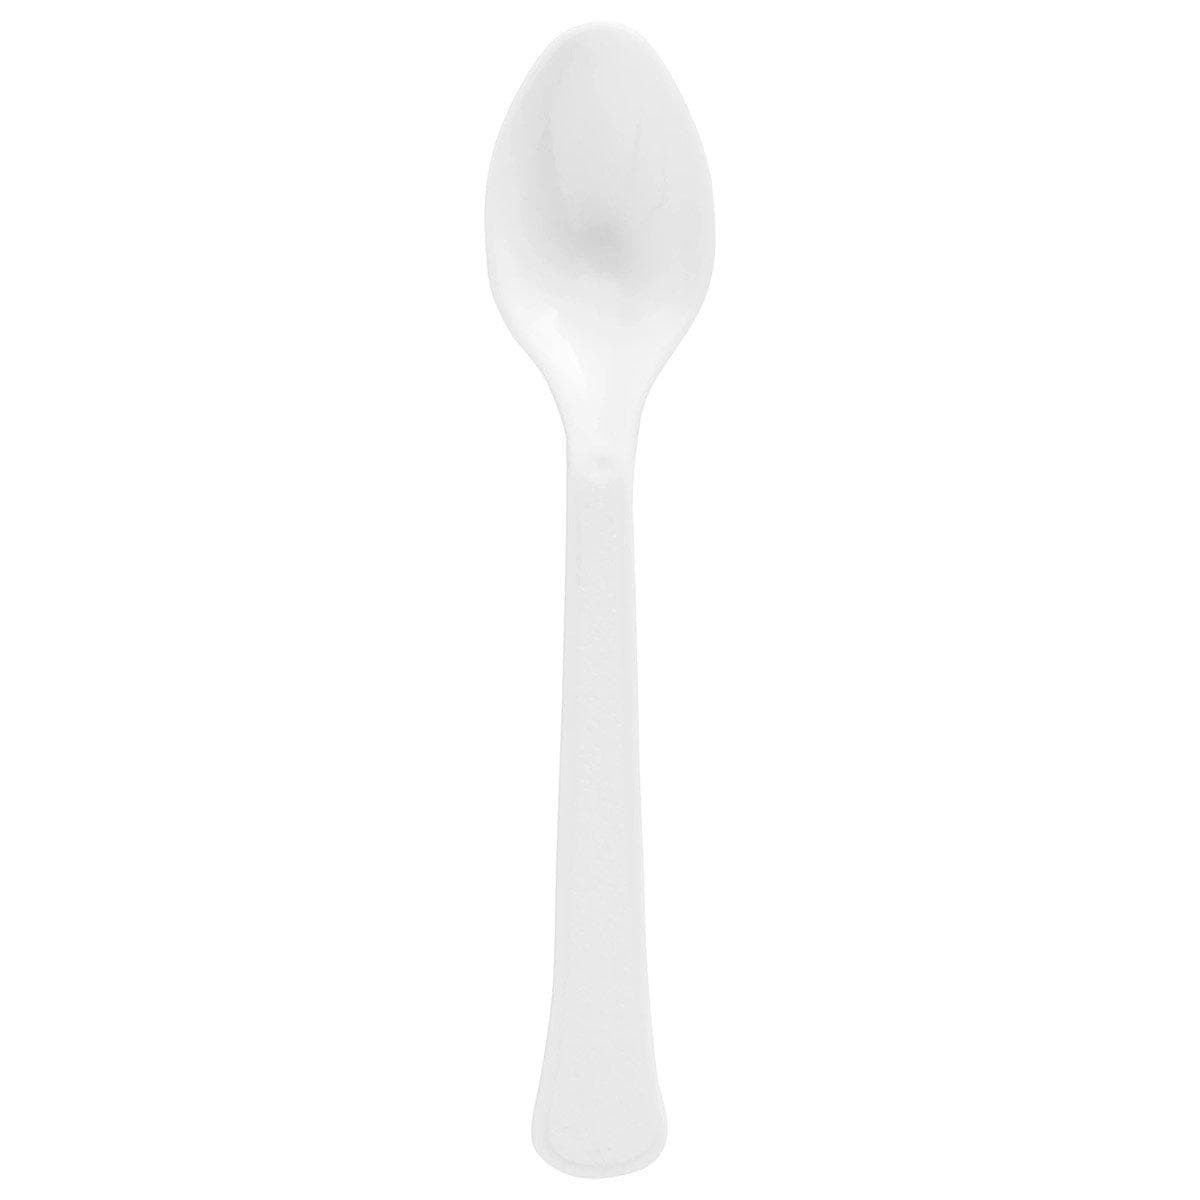 Buy Plasticware Frosty White Plastic Spoons, 20 Count sold at Party Expert